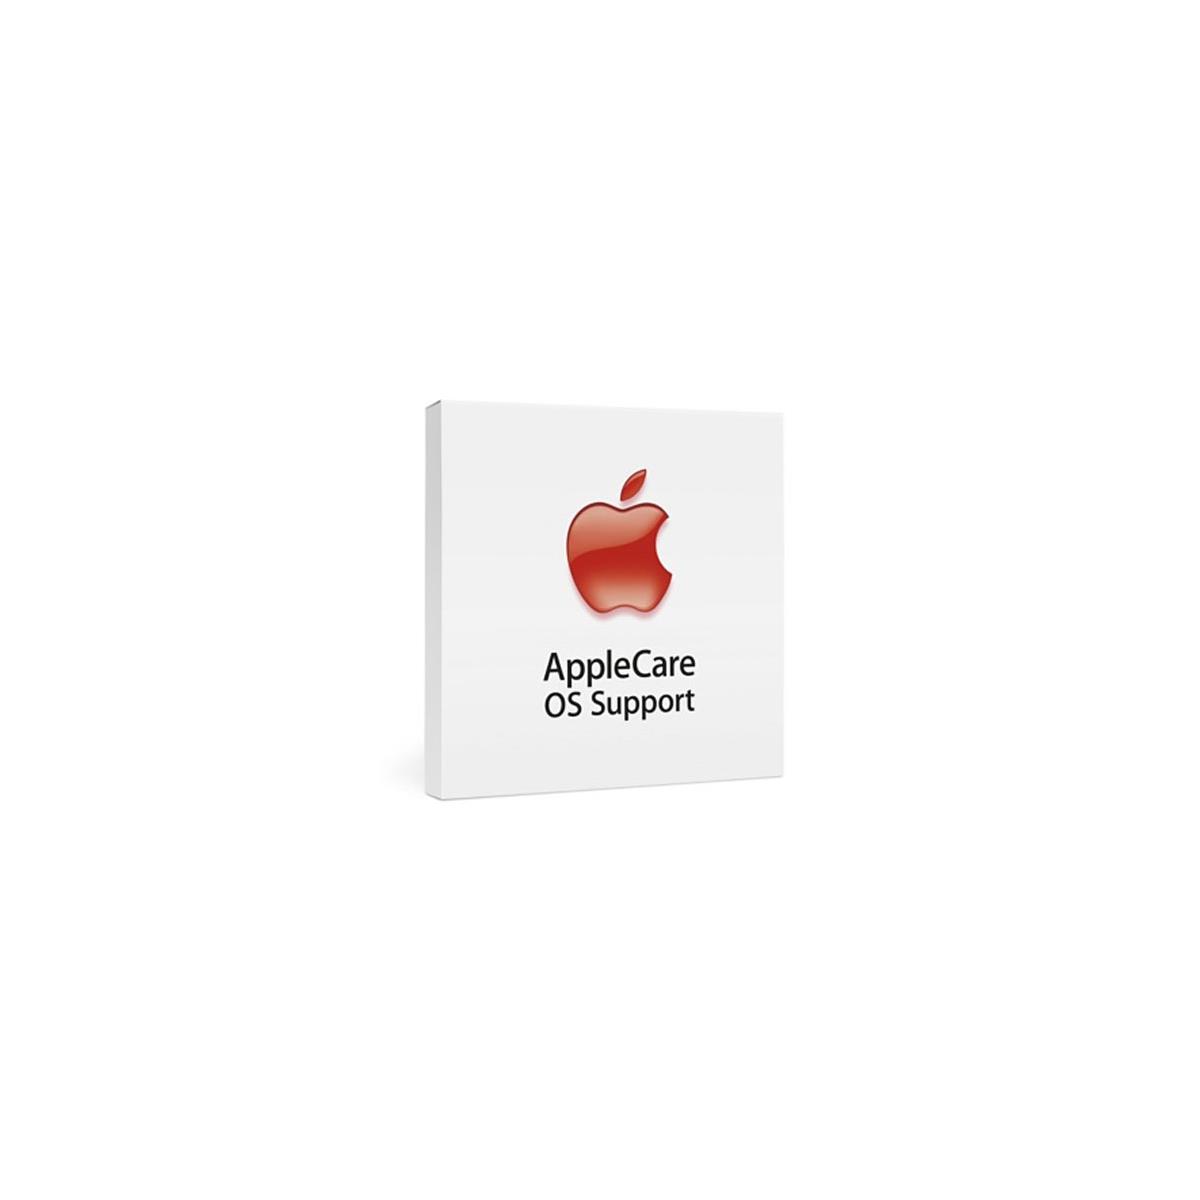 Image of Apple AppleCare OS Support